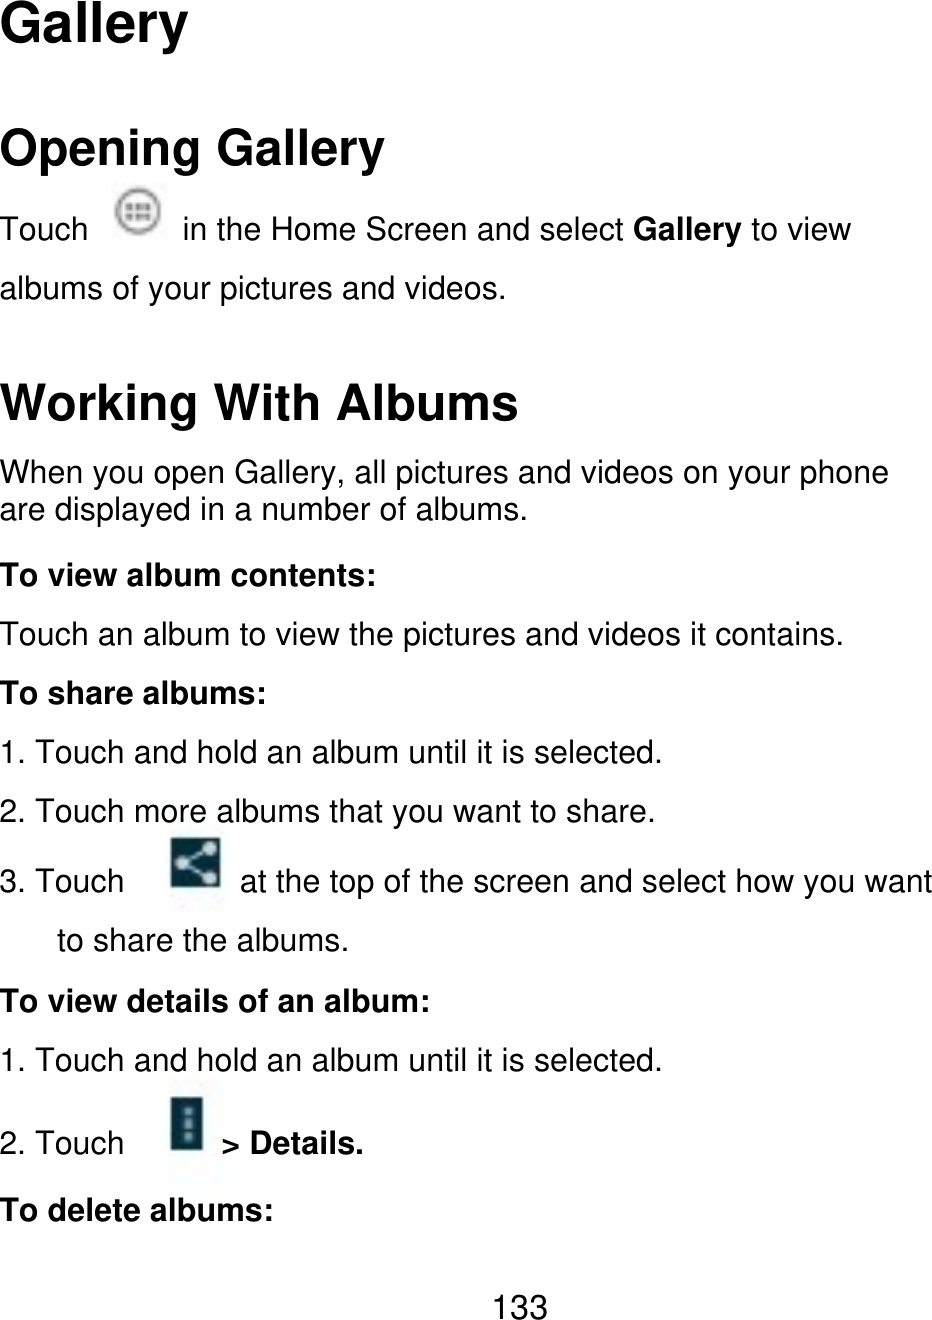 Gallery Opening Gallery Touch in the Home Screen and select Gallery to view albums of your pictures and videos. Working With Albums When you open Gallery, all pictures and videos on your phone are displayed in a number of albums. To view album contents: Touch an album to view the pictures and videos it contains. To share albums: 1. Touch and hold an album until it is selected. 2. Touch more albums that you want to share. 3. Touch at the top of the screen and select how you want to share the albums. To view details of an album: 1. Touch and hold an album until it is selected. 2. Touch &gt; Details. To delete albums: 133 